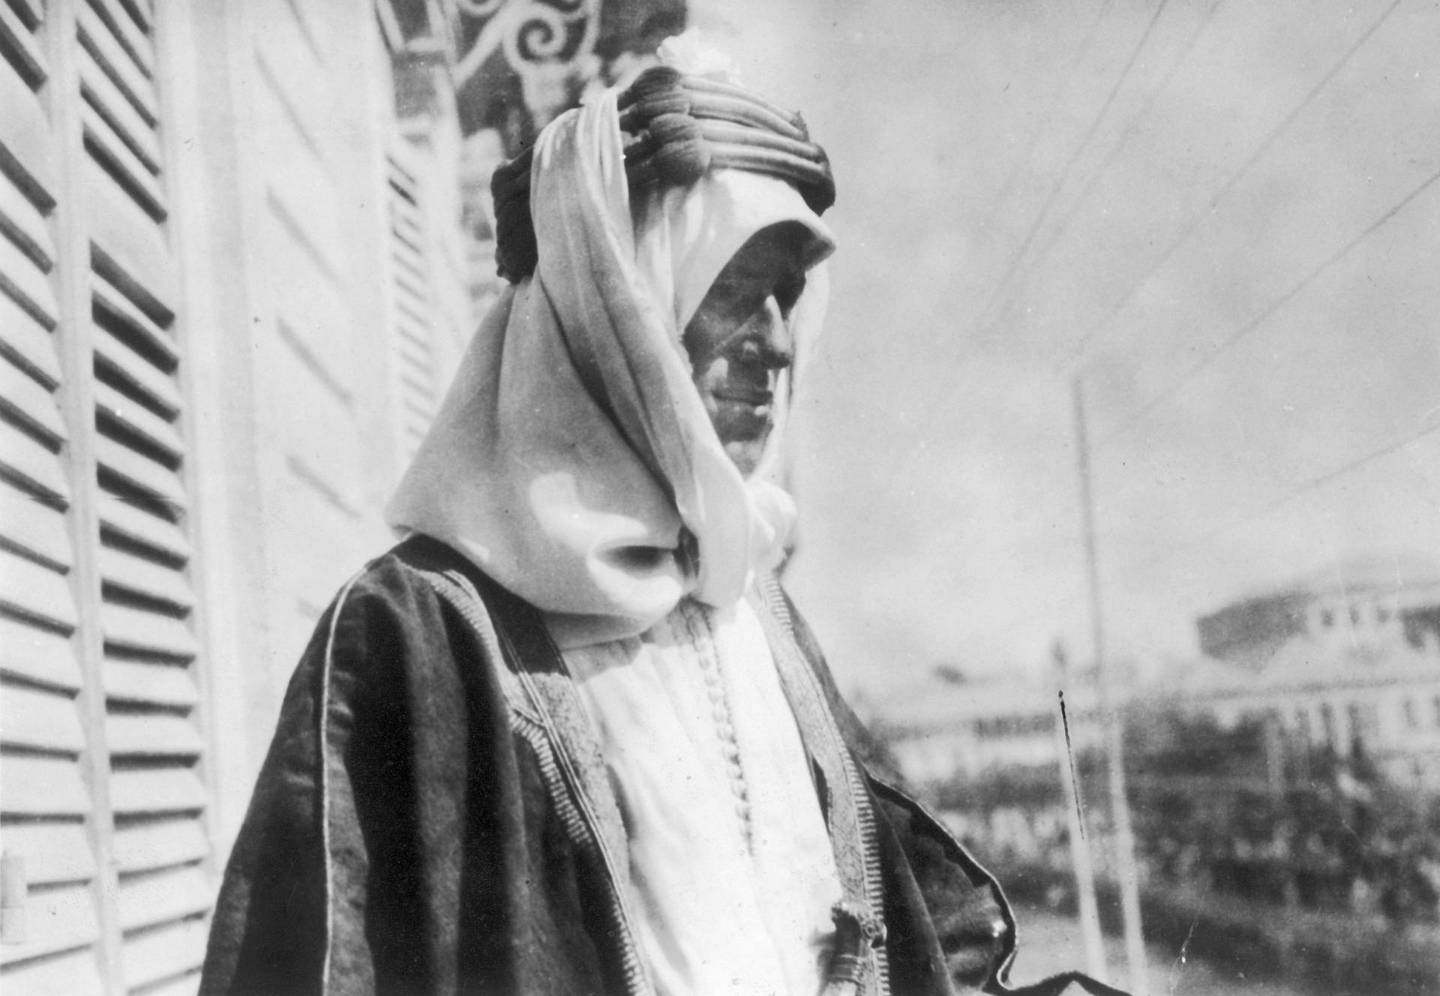 Portrait of LAWRENCE OF ARABIA between 1914 and 1918. Born Thomas Edward LAWRENCE (1888-1935), he was a British adventurer, officer and writer. When an agent to the British secret services, he played an important role in the uprising of the Arabs against the Turks during the First World War. (Getty Images)